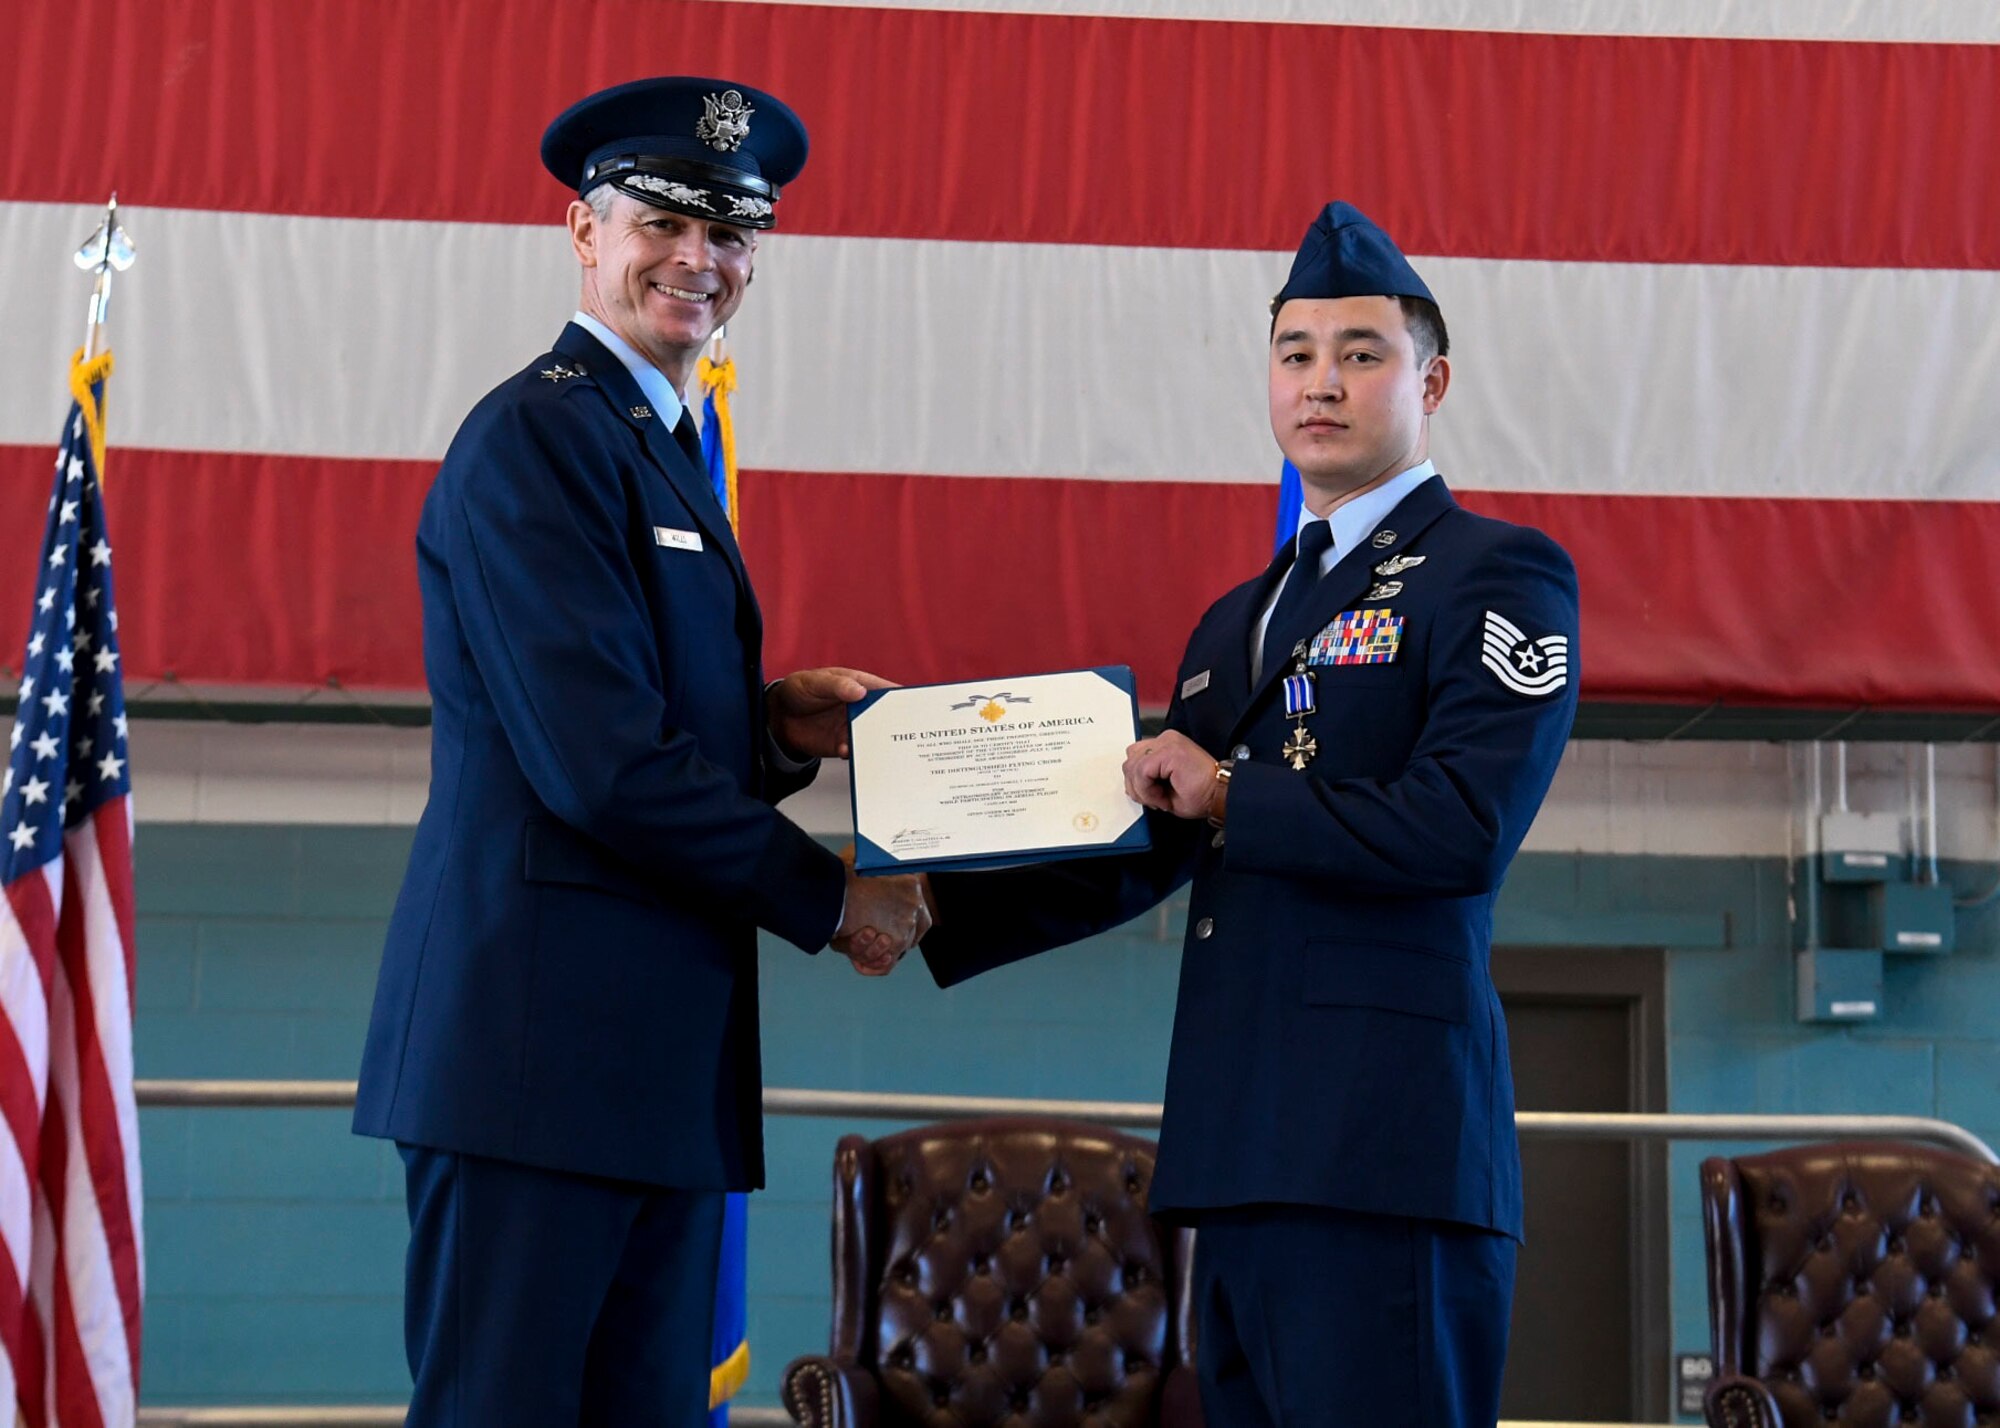 An Airman is awarded the Distinguished Flying Cross.